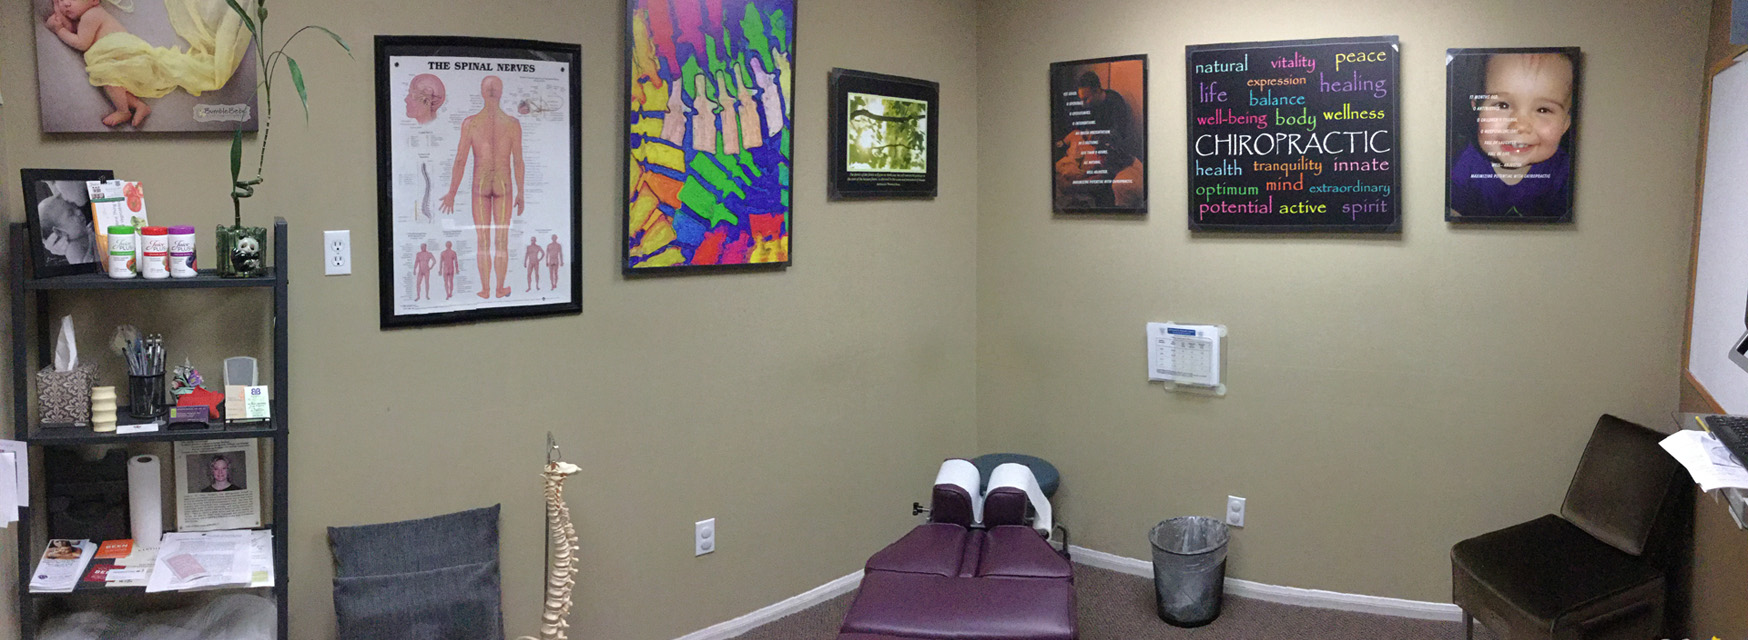 Image of San Diego Chiropractic and Massage treatment room